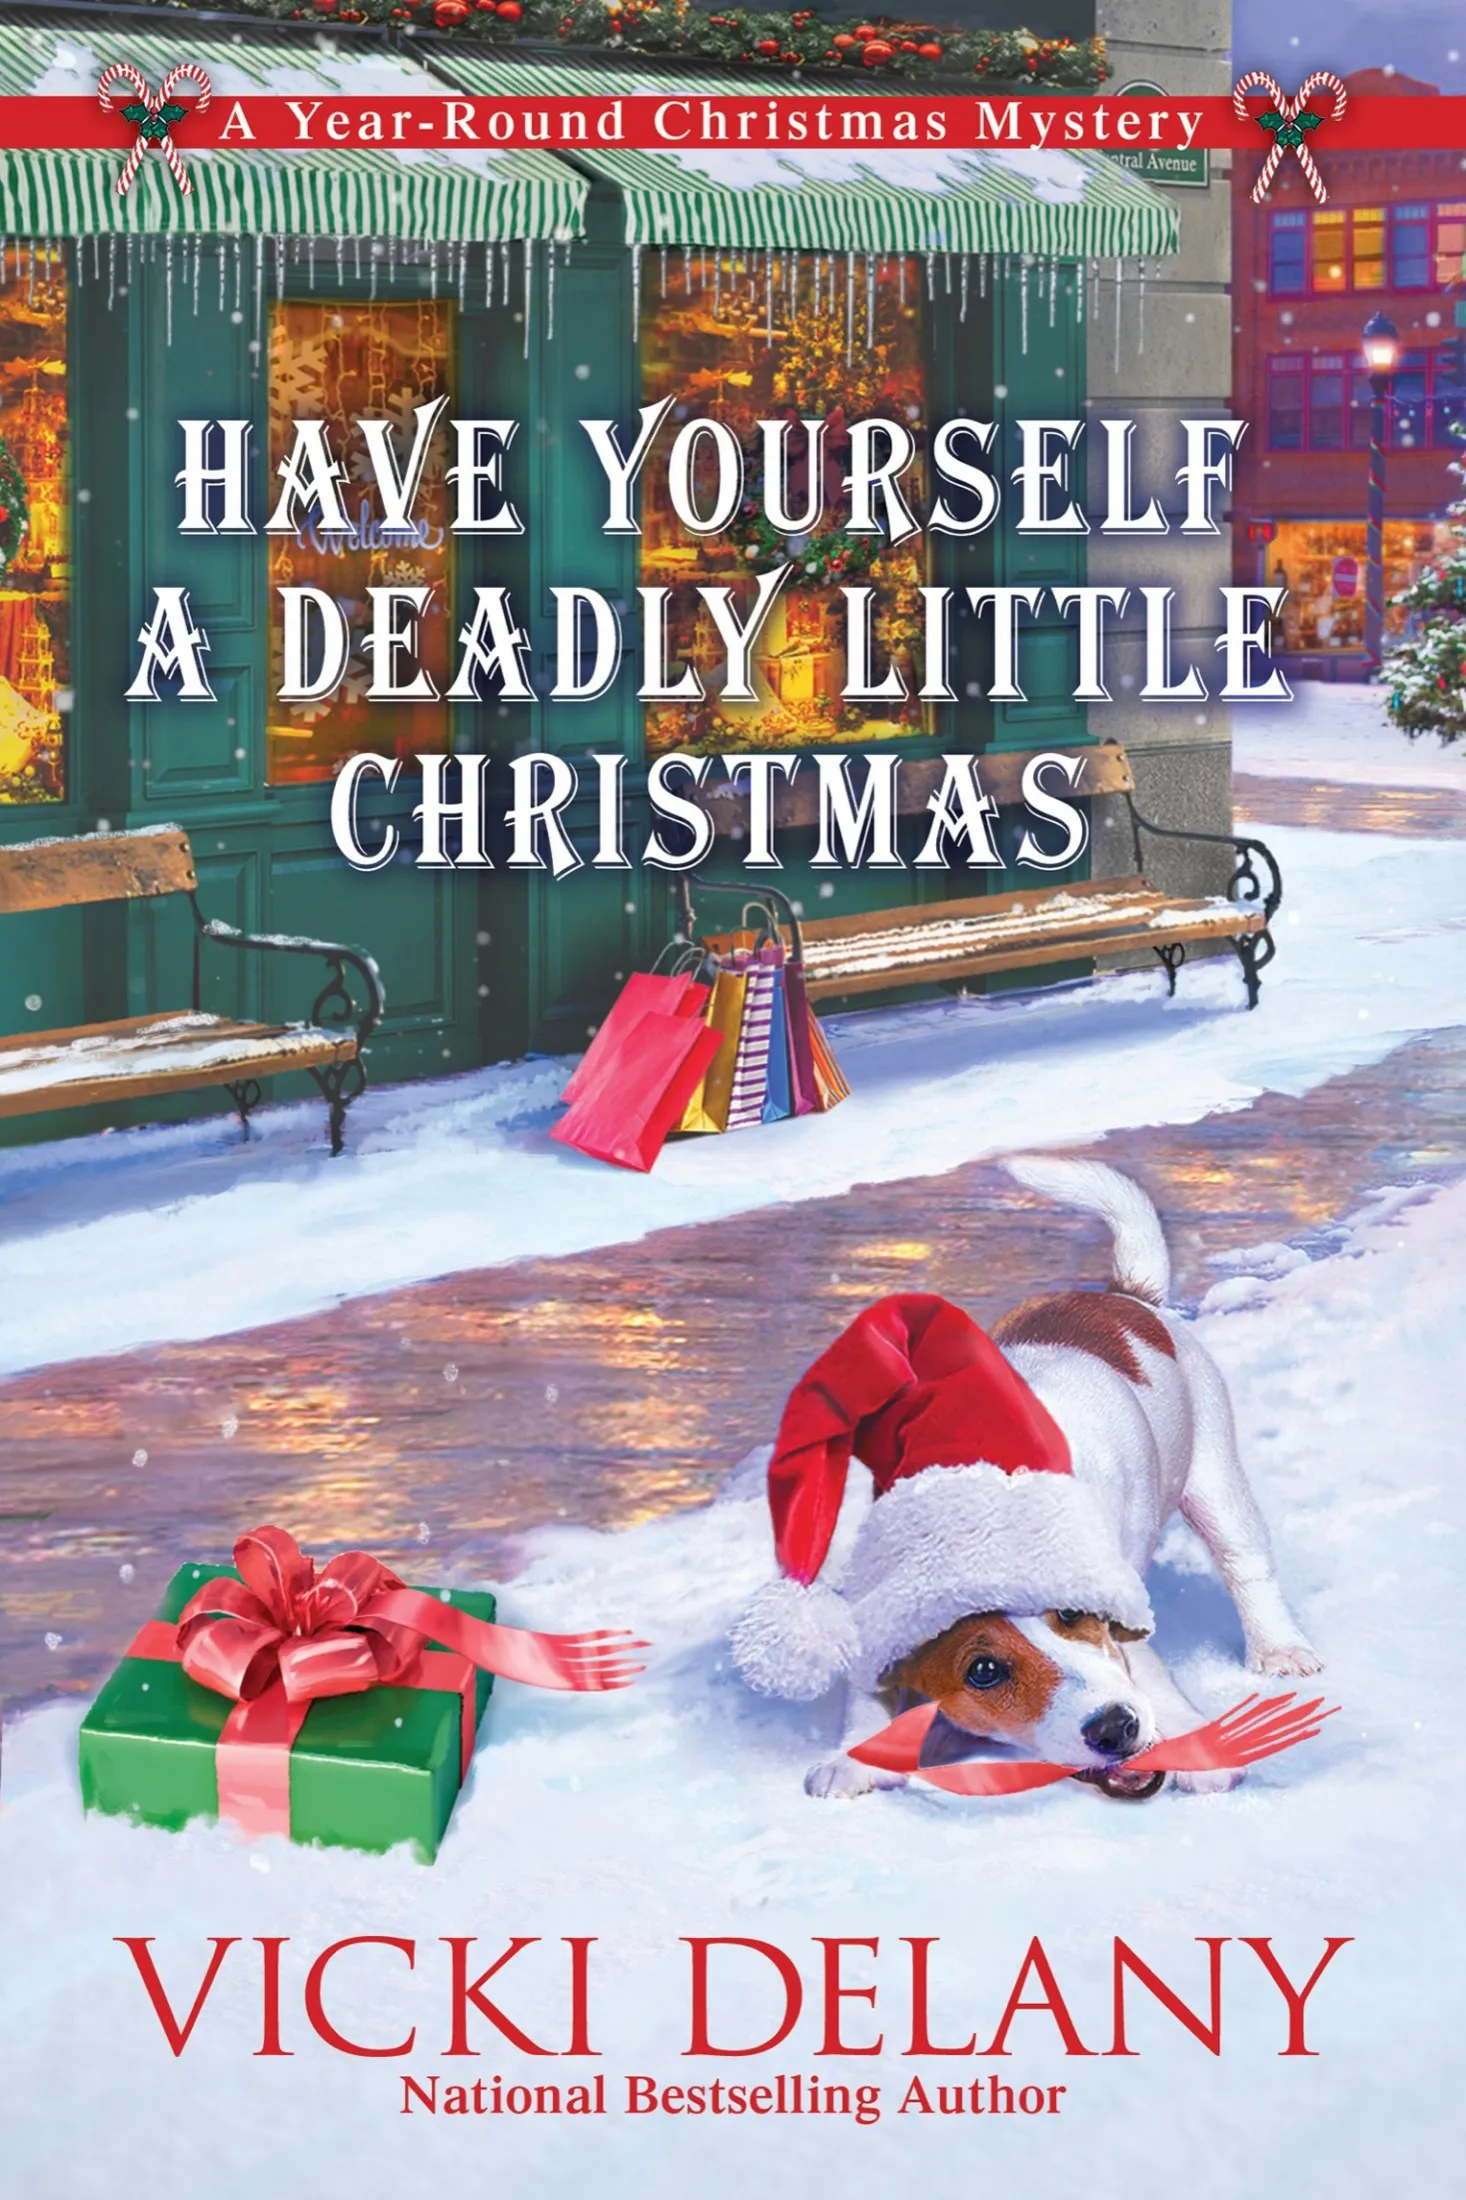 Have Yourself a Deadly Little Christmas (A Year-Round Christmas Mystery #6)